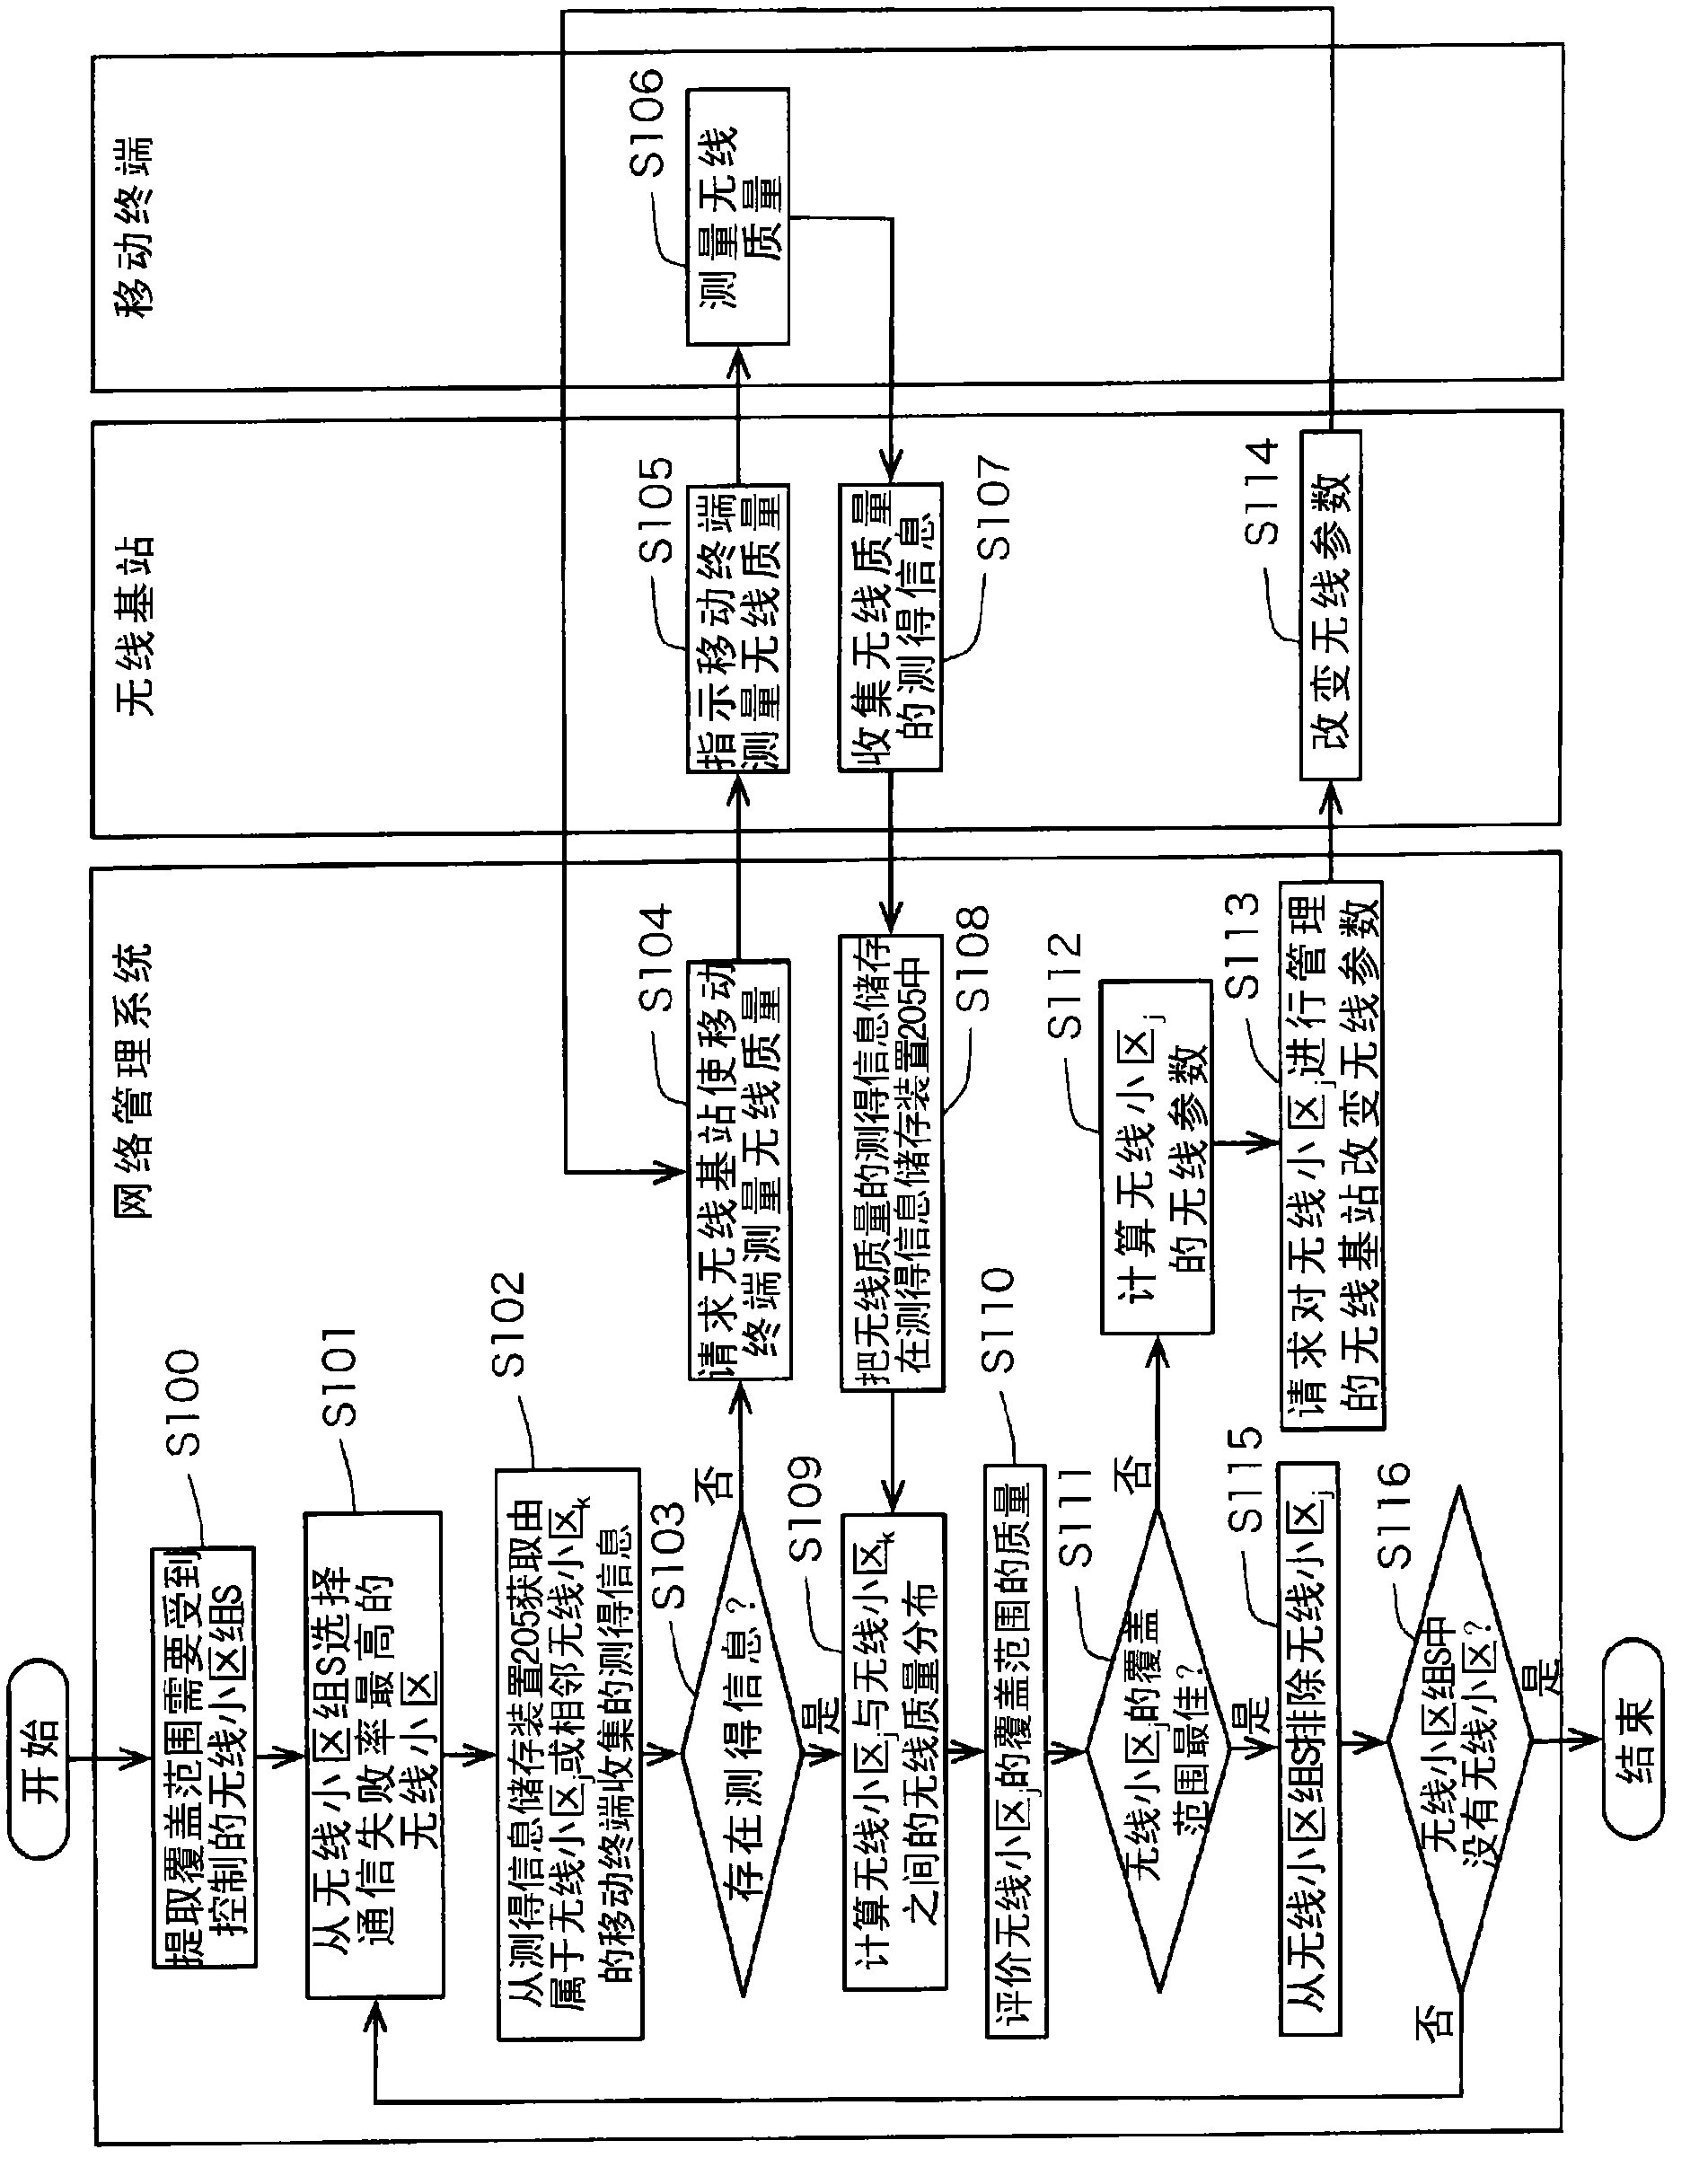 Network management system, wireless coverage control method, and wireless coverage control program